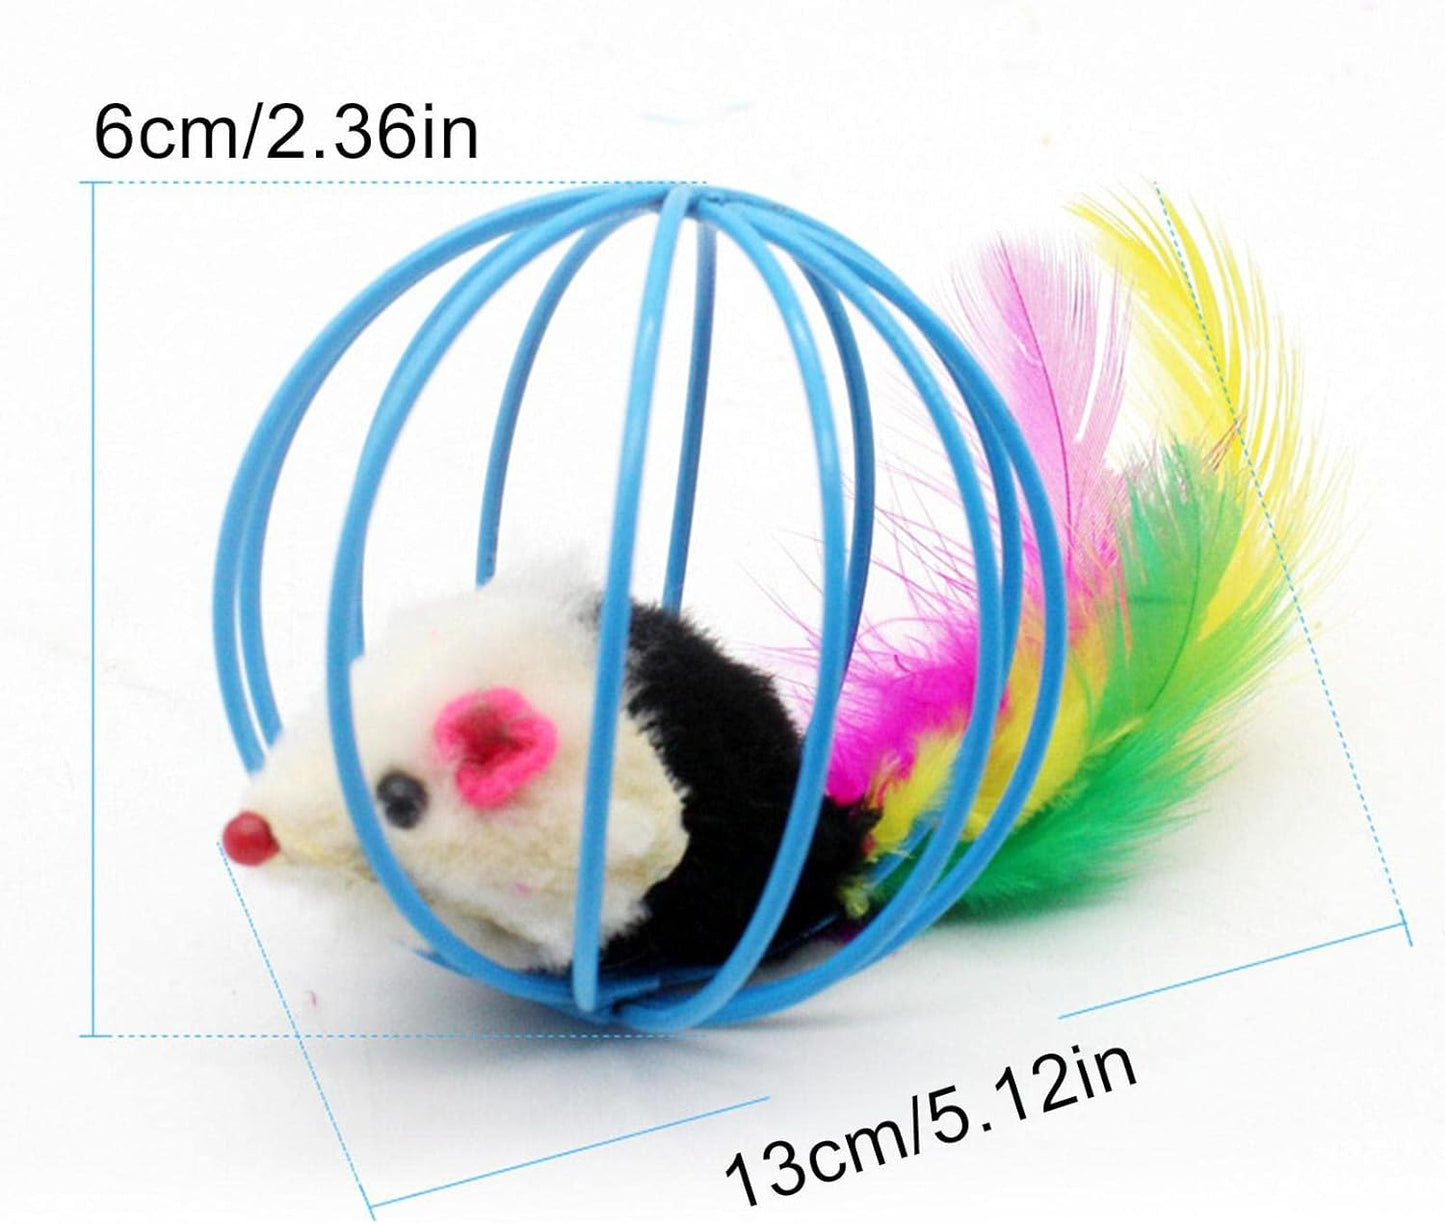 Interactive Colorful Mouse in a Cage Ball